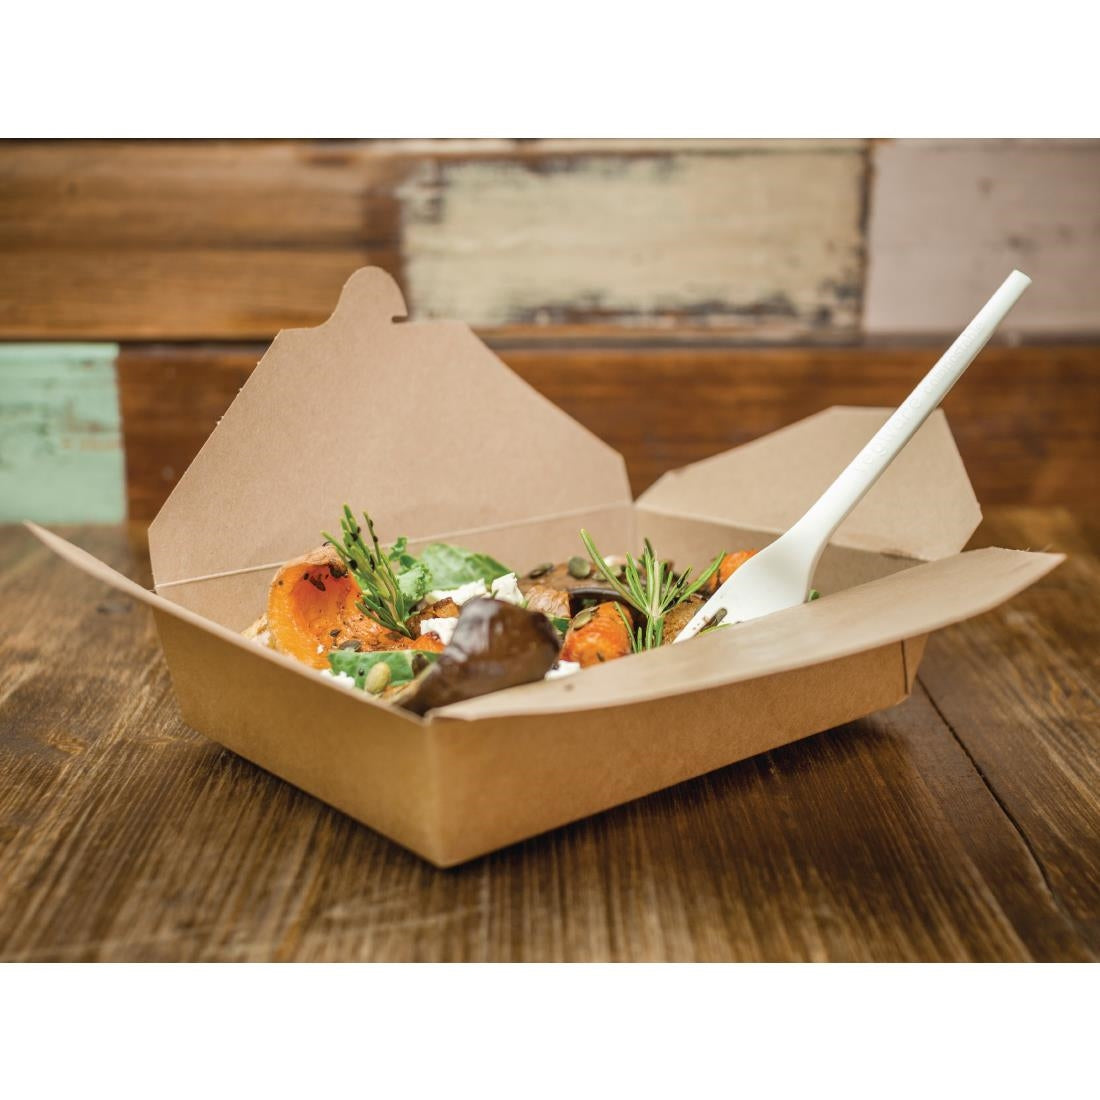 Vegware Compostable Paperboard Food Boxes No.5 1050ml / 37oz (Pack of 150)